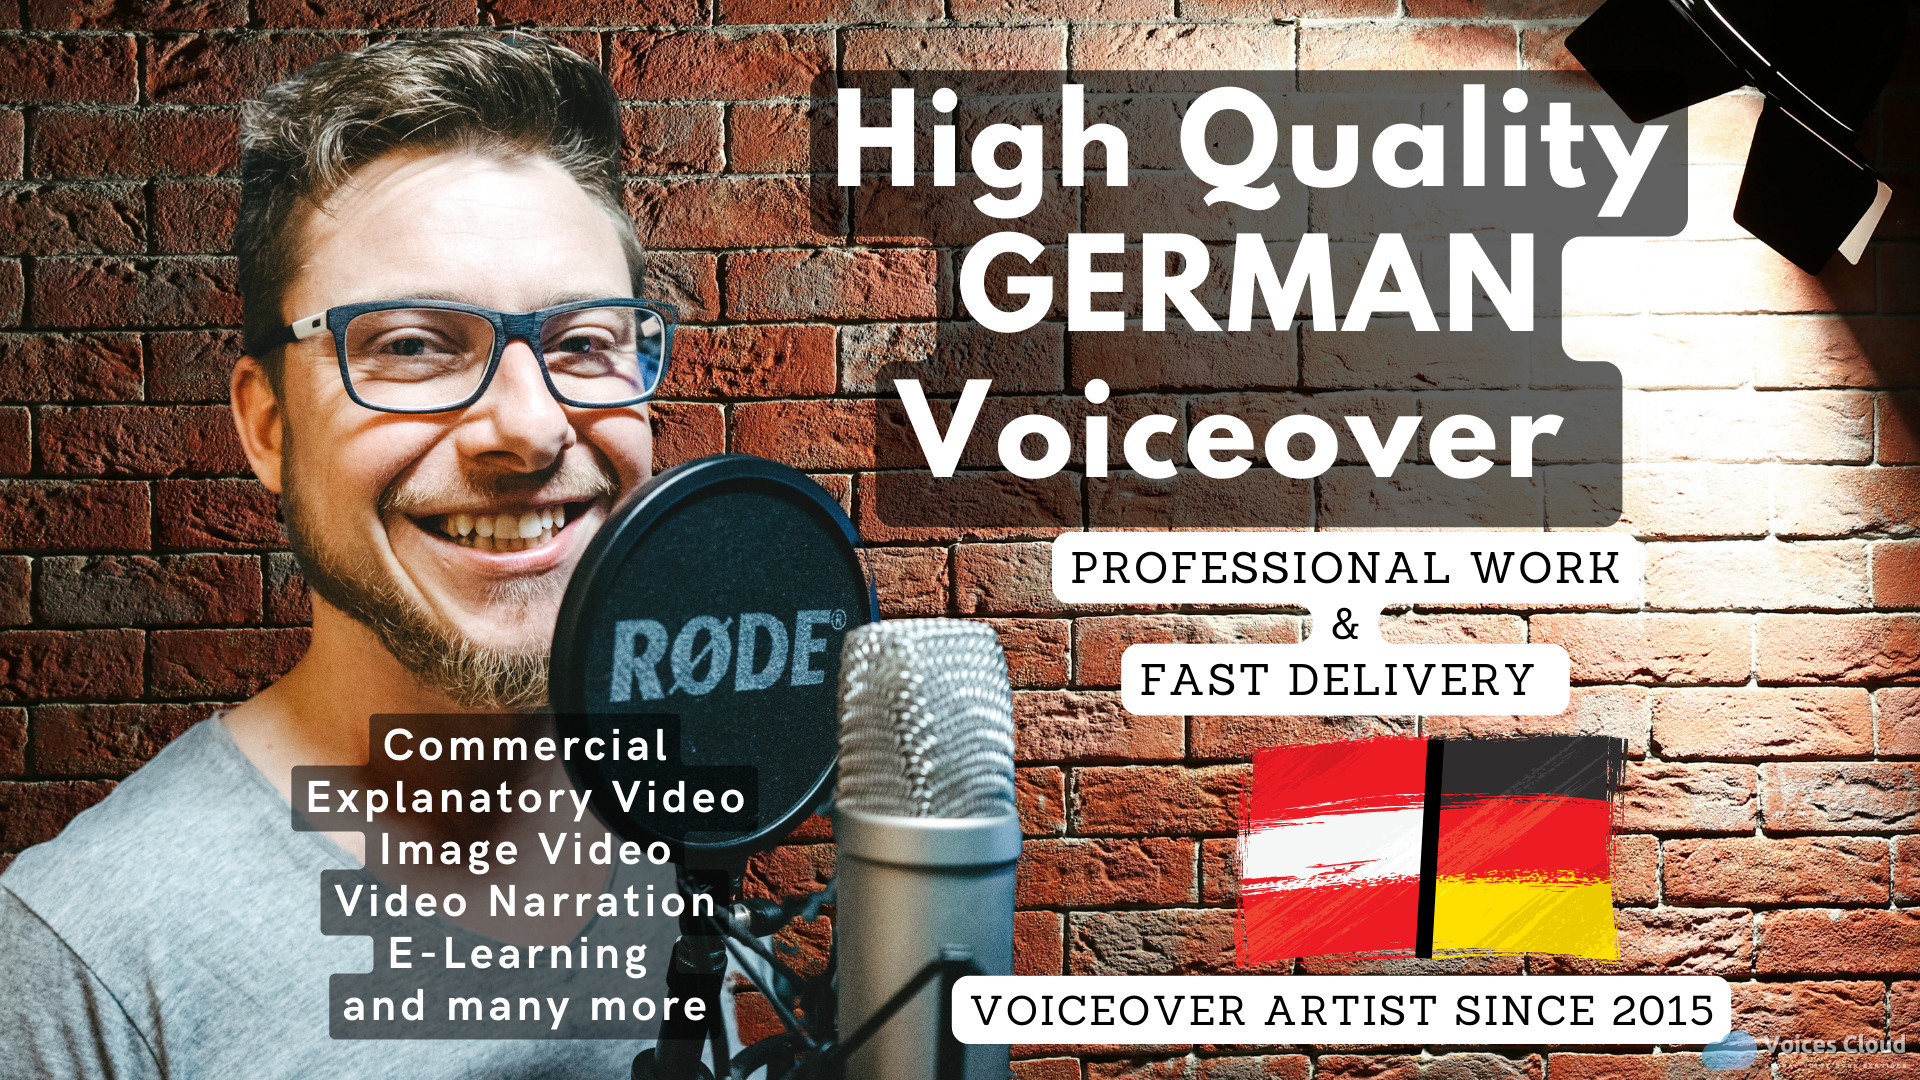 73599Voice-Over Artist. I´ll Produce A Professional Vo In Danish, German And English